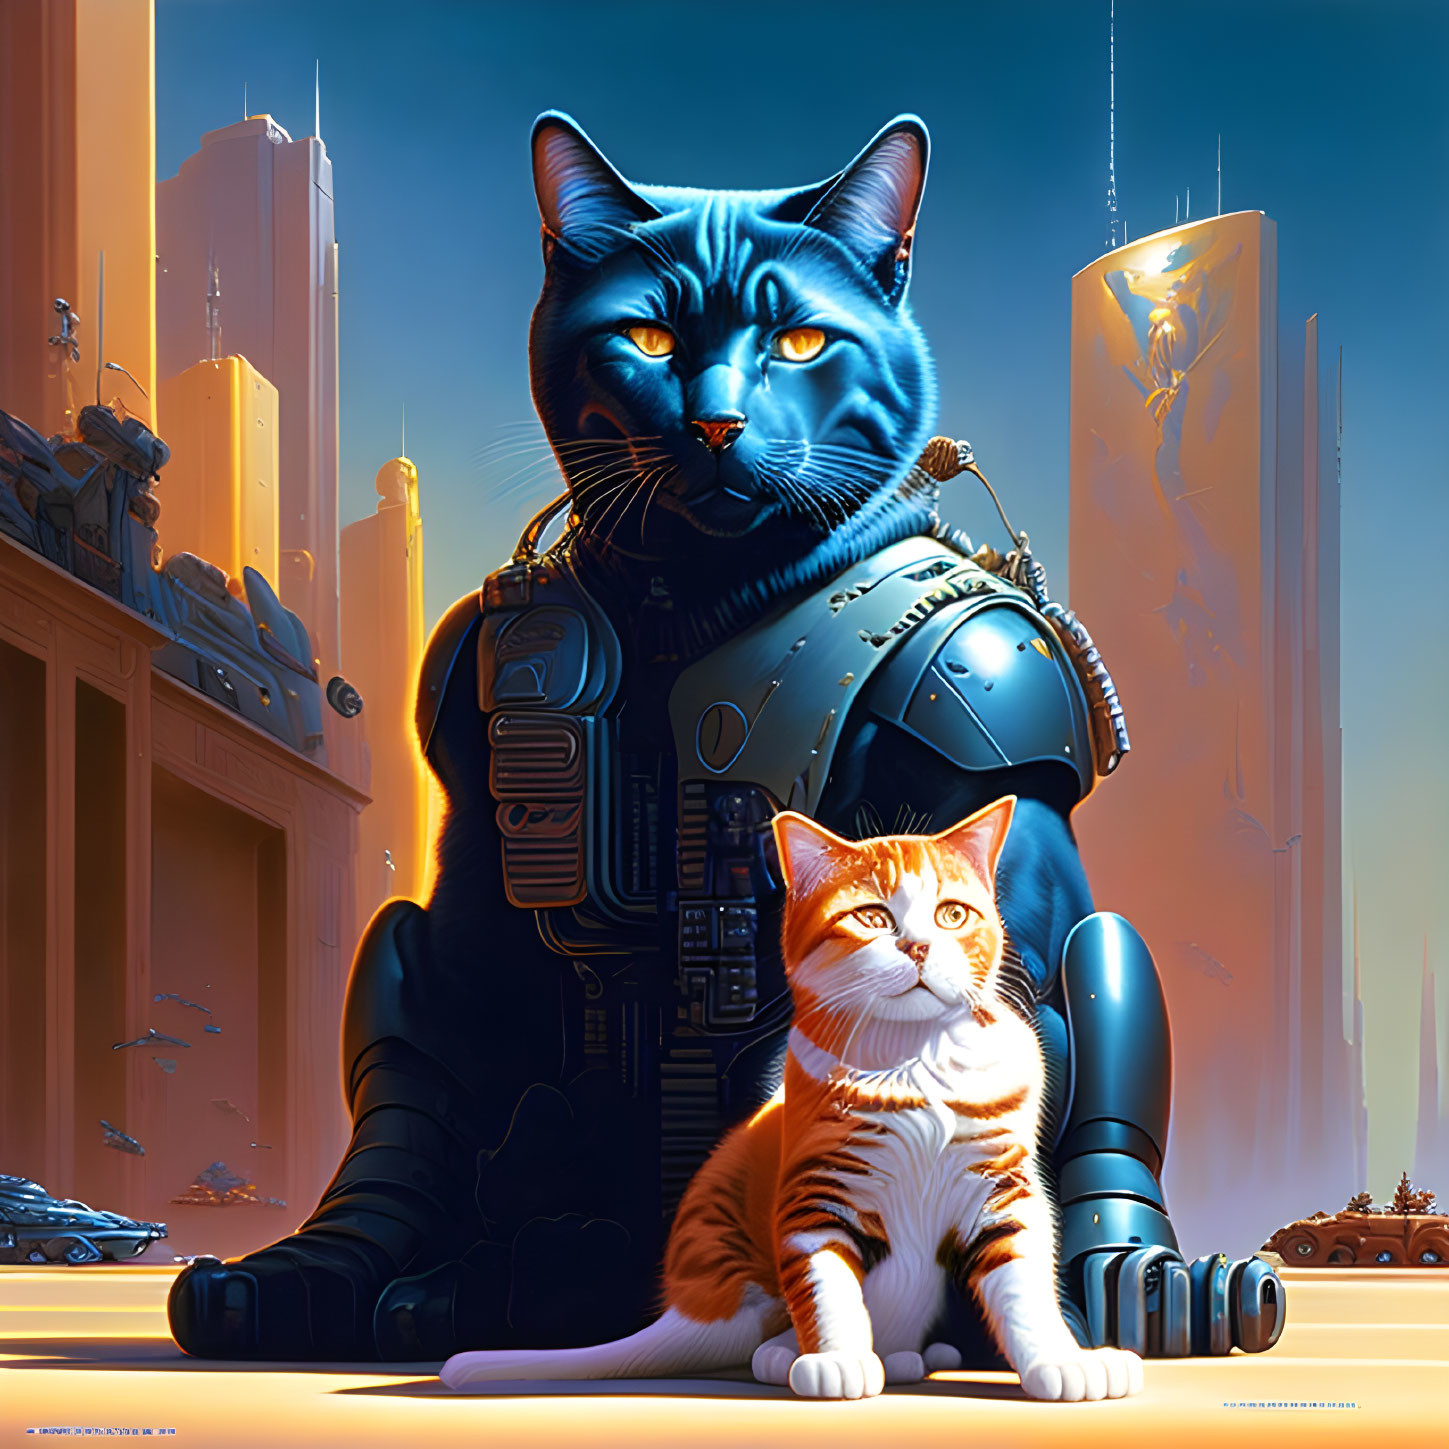 Blue cybernetic cat and smaller orange cat in futuristic cityscape at sunset